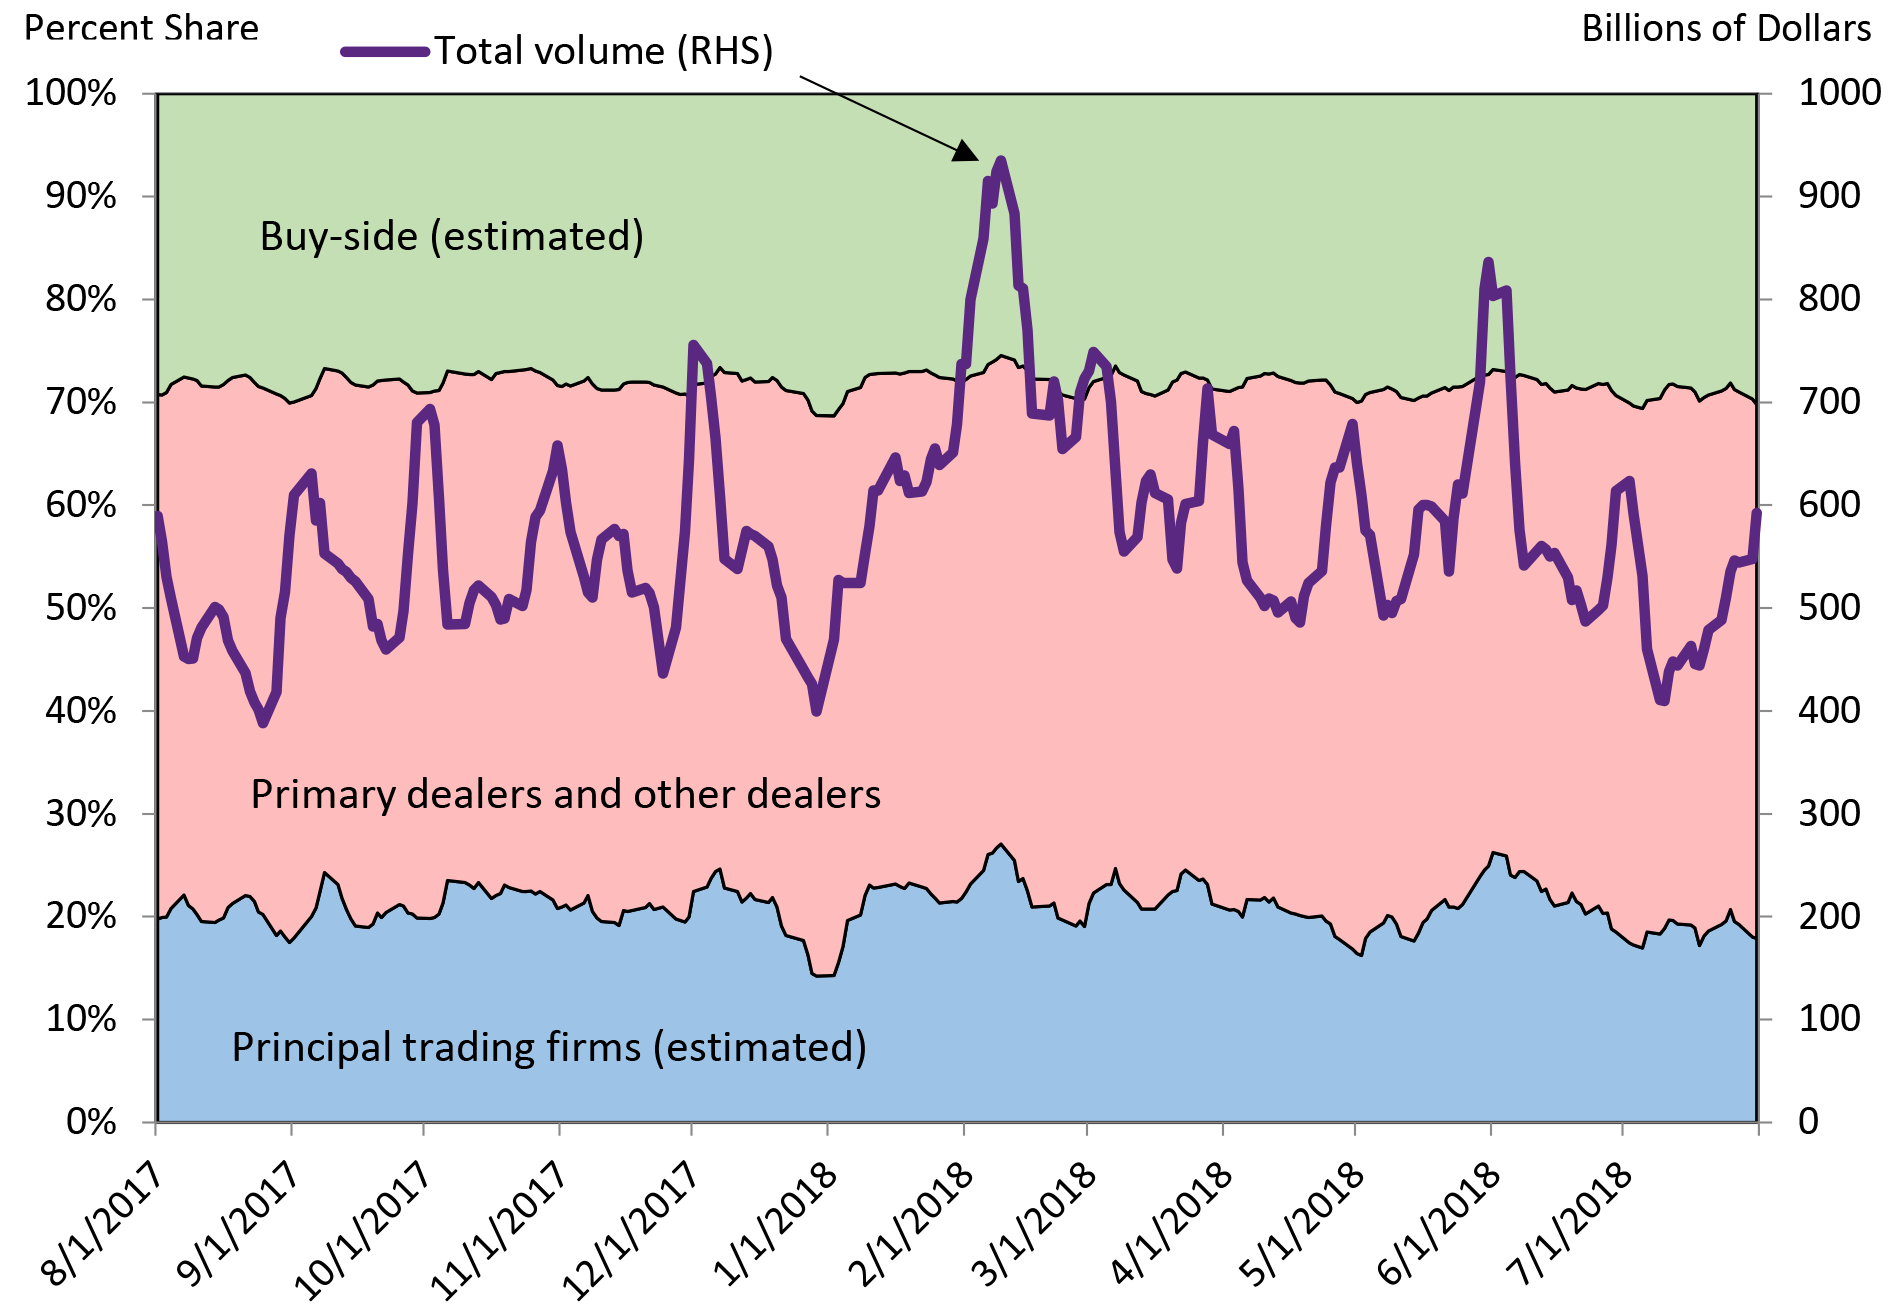 Figure 3. Trading Volume Shares by Participant Type. See accessible link for data description.